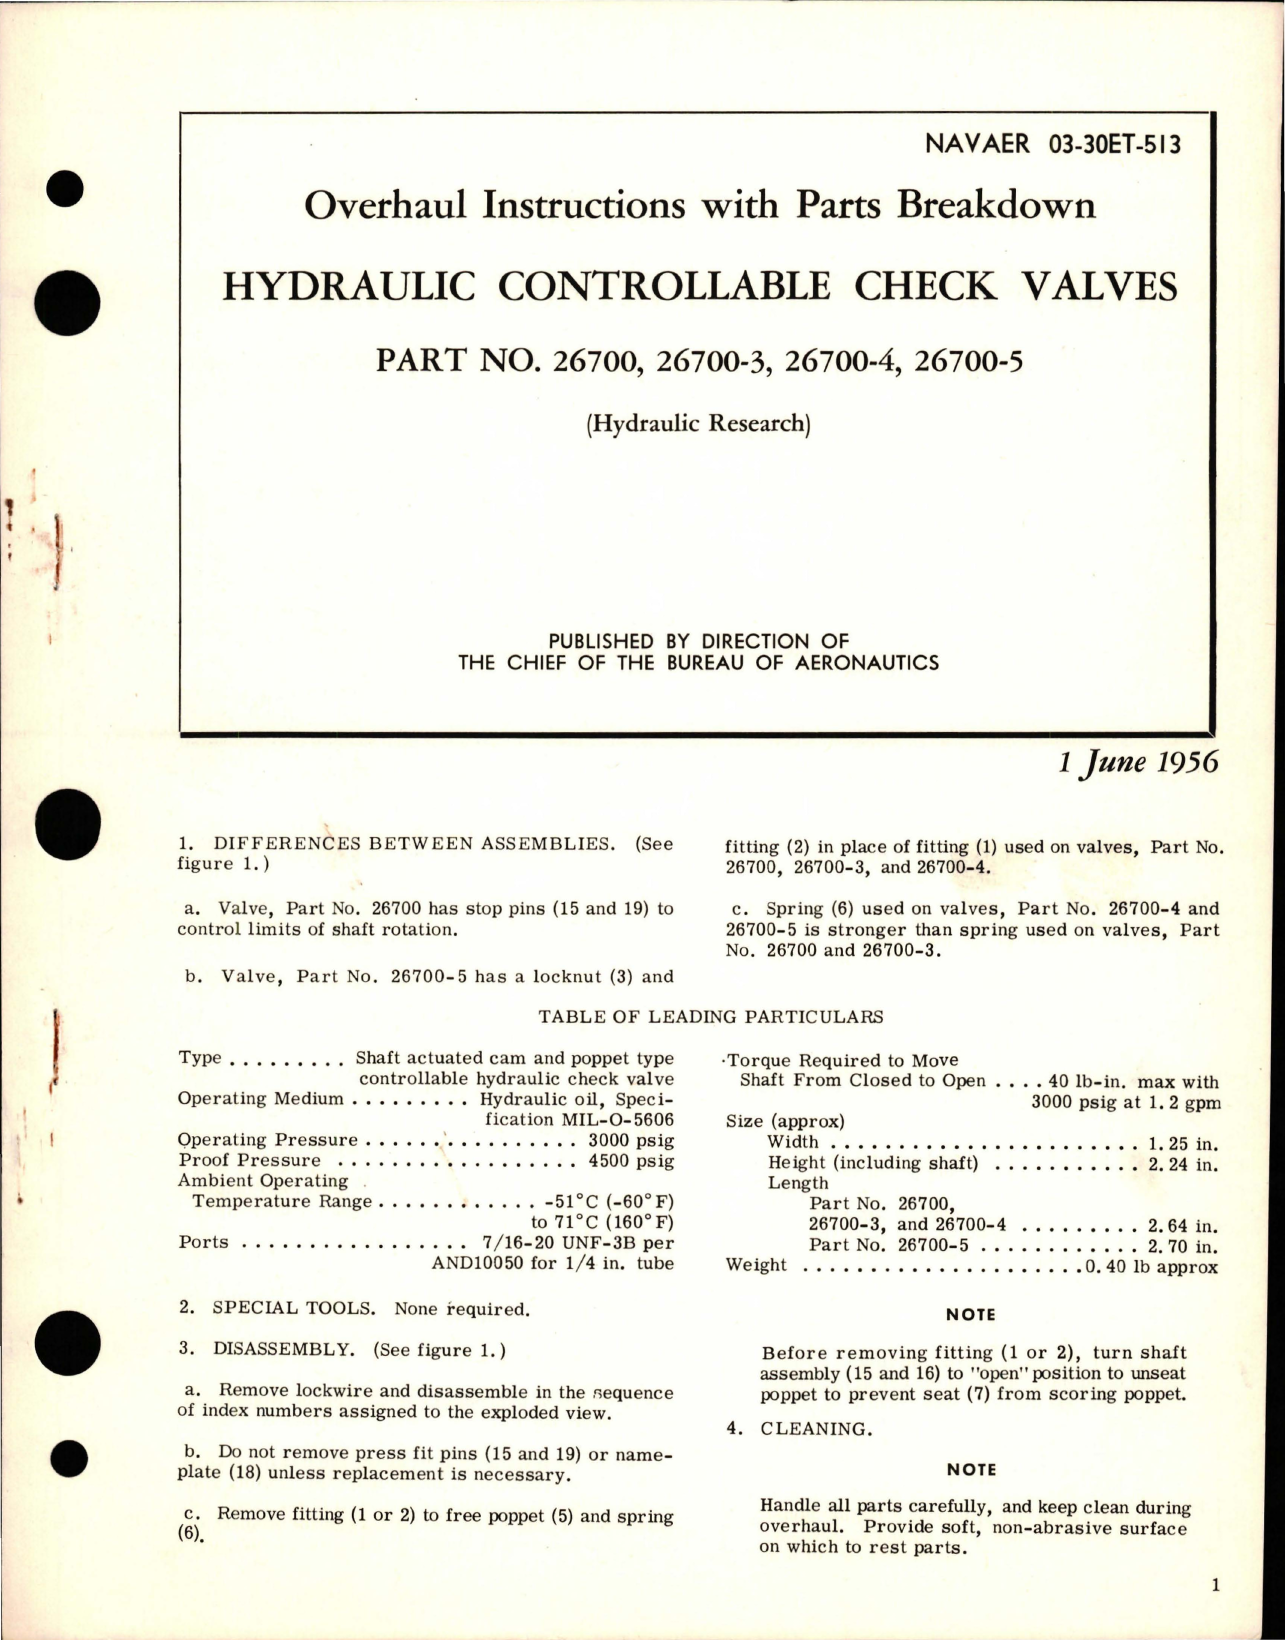 Sample page 1 from AirCorps Library document: Overhaul Instructions with Parts Breakdown for Hydraulic Controllable Check Valves - Parts 26700, 26700-3, 26700-4, and 26700-5